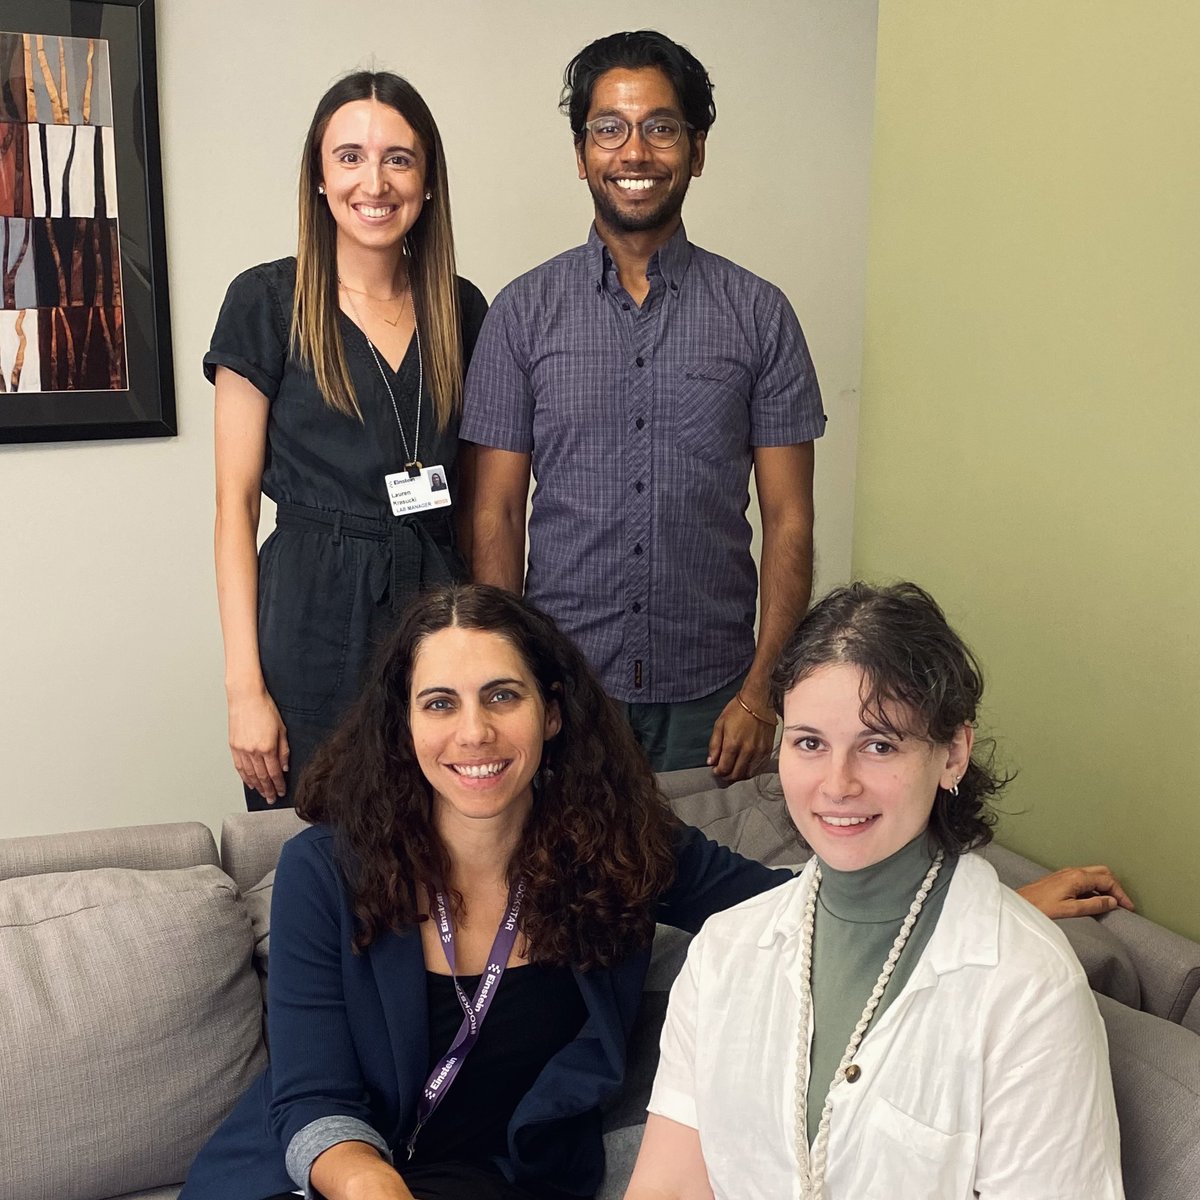 MRRI is excited to showcase upcoming National Academy of Neuropsychology Conference presentations from our #TBI research team, including @ooMAYshh, Lauren Krasucki, and Alissa Kerr. Read more on our blog: mrri.org/mrri-researche… @arabinow @NANneuropsych @ResearchAtJeff #NAN2023